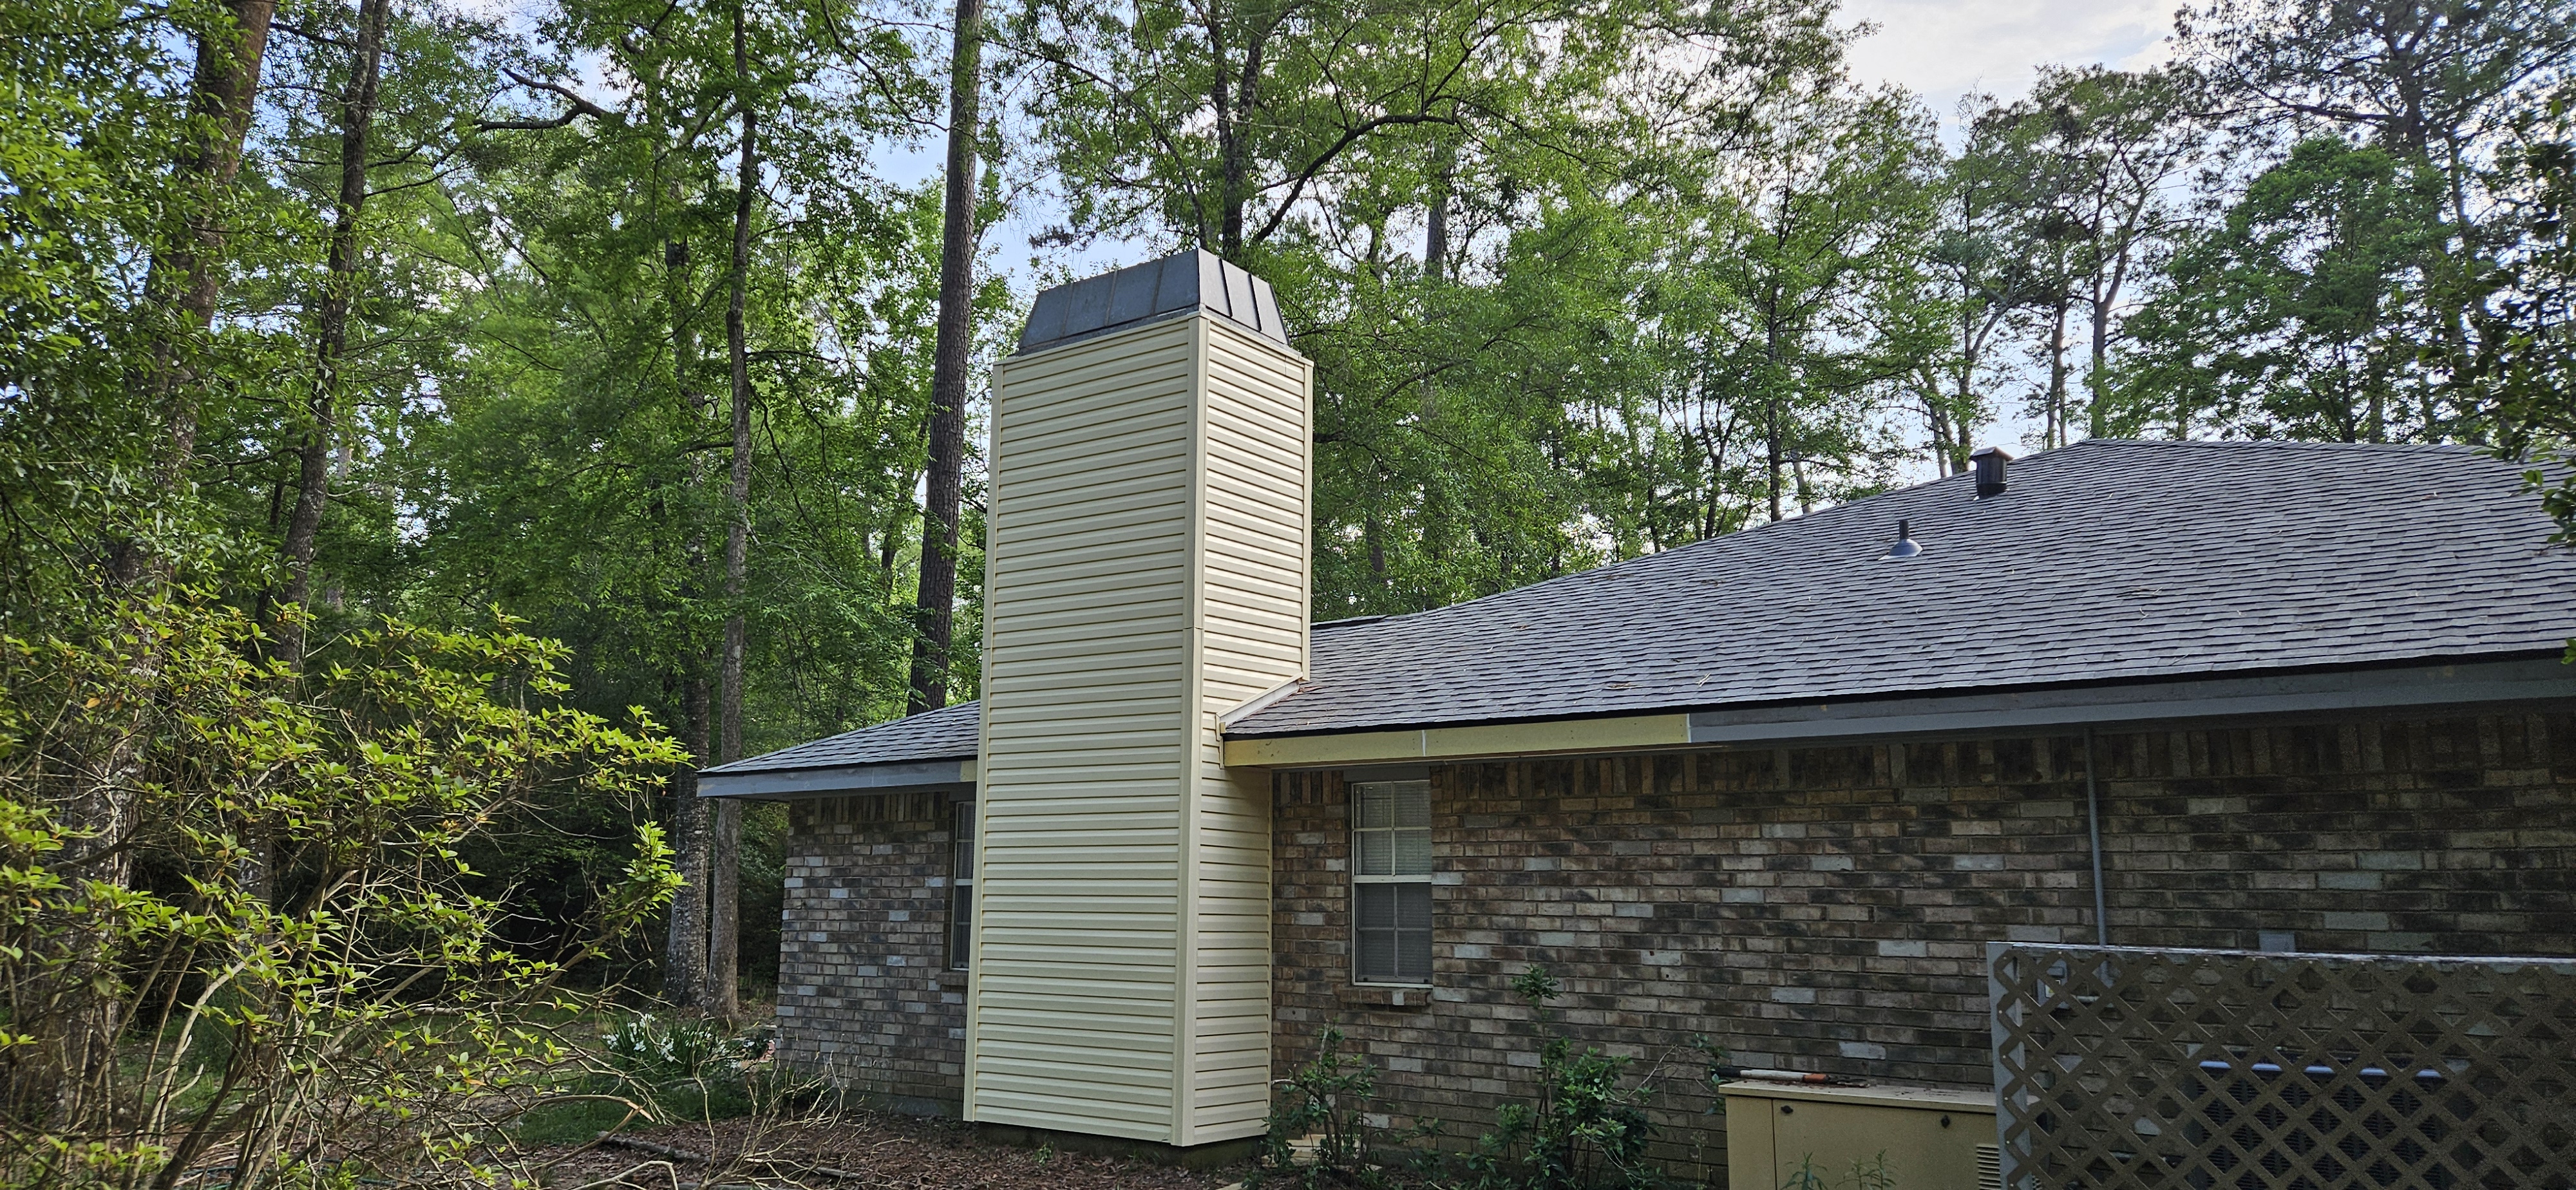 Revamp Your St. Tammany Parish Home's Curb Appeal with Durable Vinyl Siding!